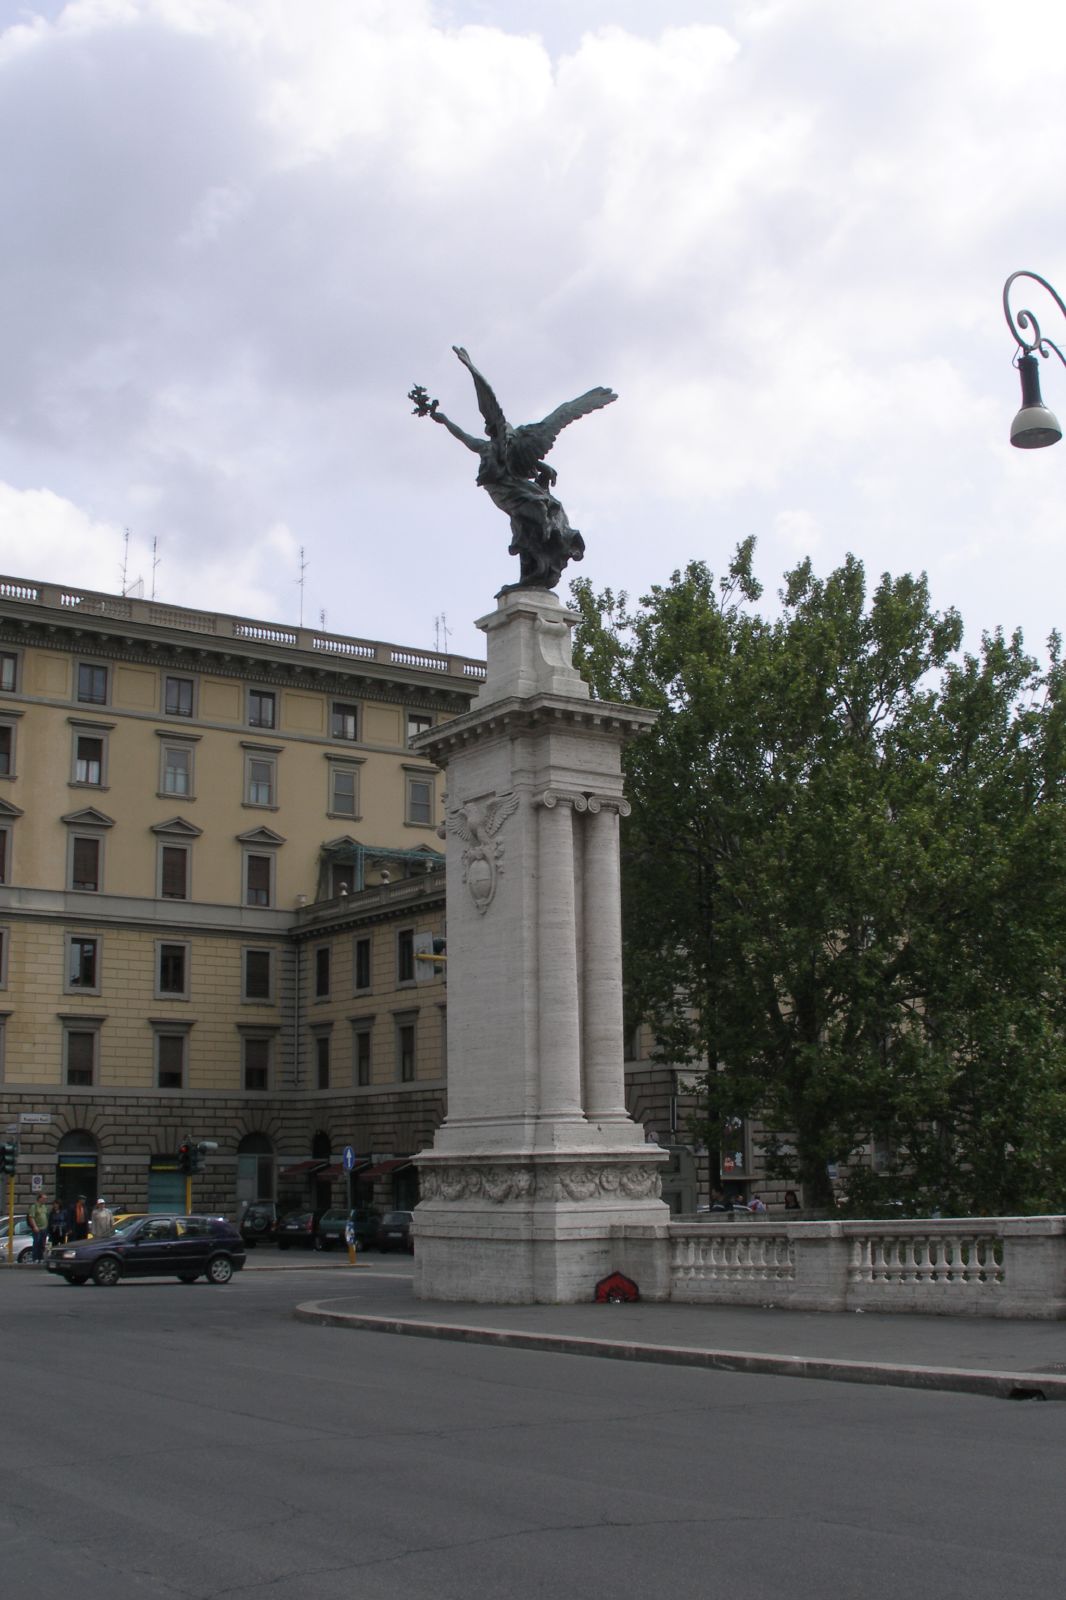 the monument has an angel on it and is located on the corner